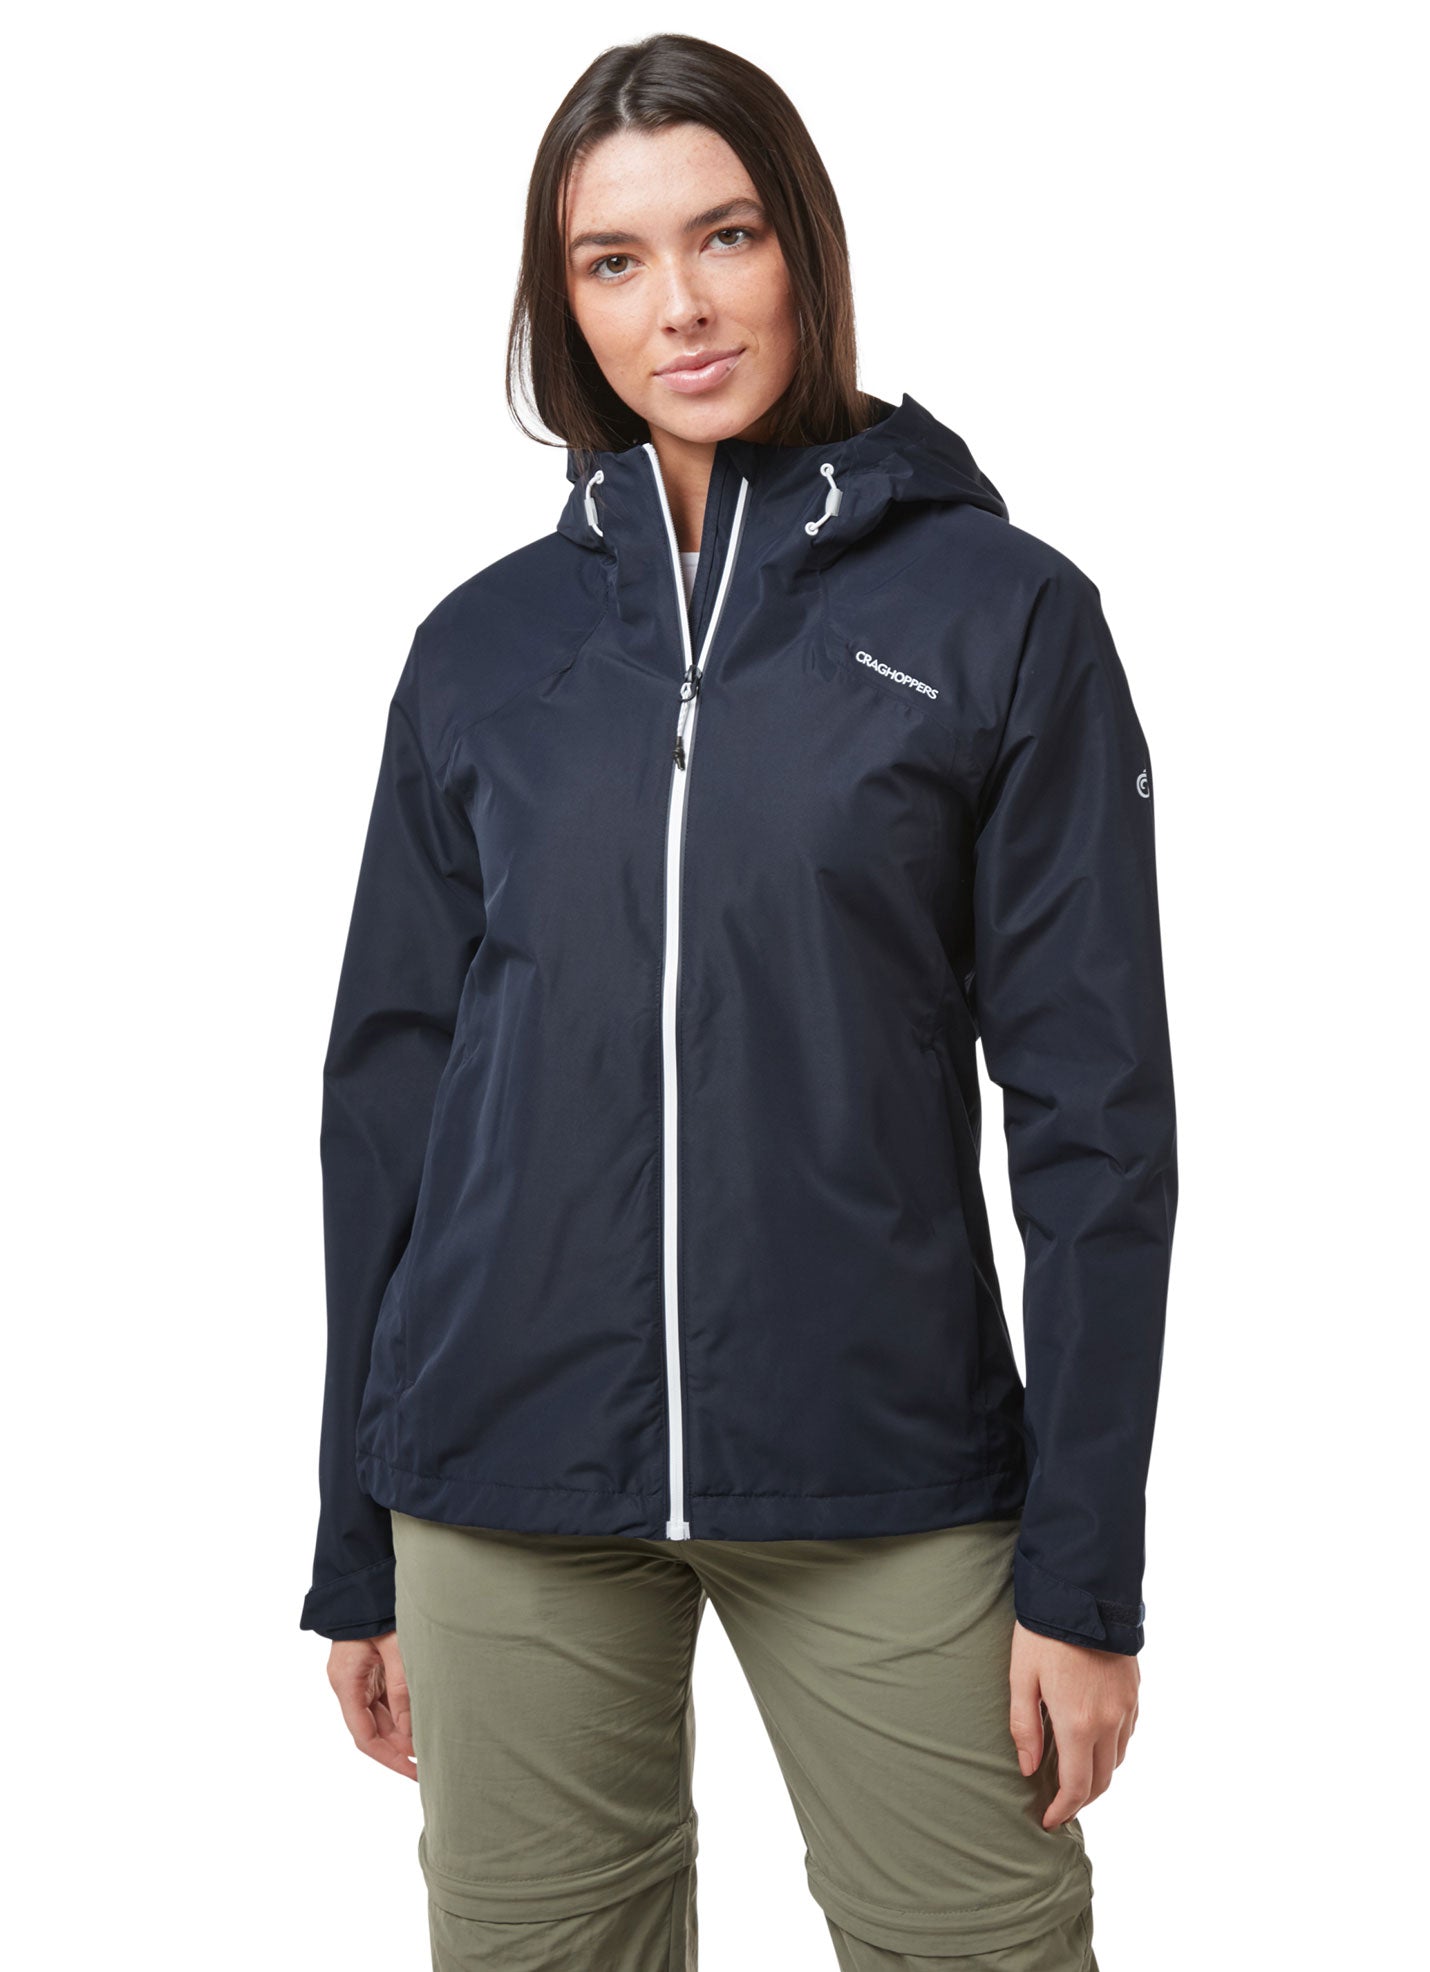 NAvy Toscana Ladies Jacket by Craghoppers